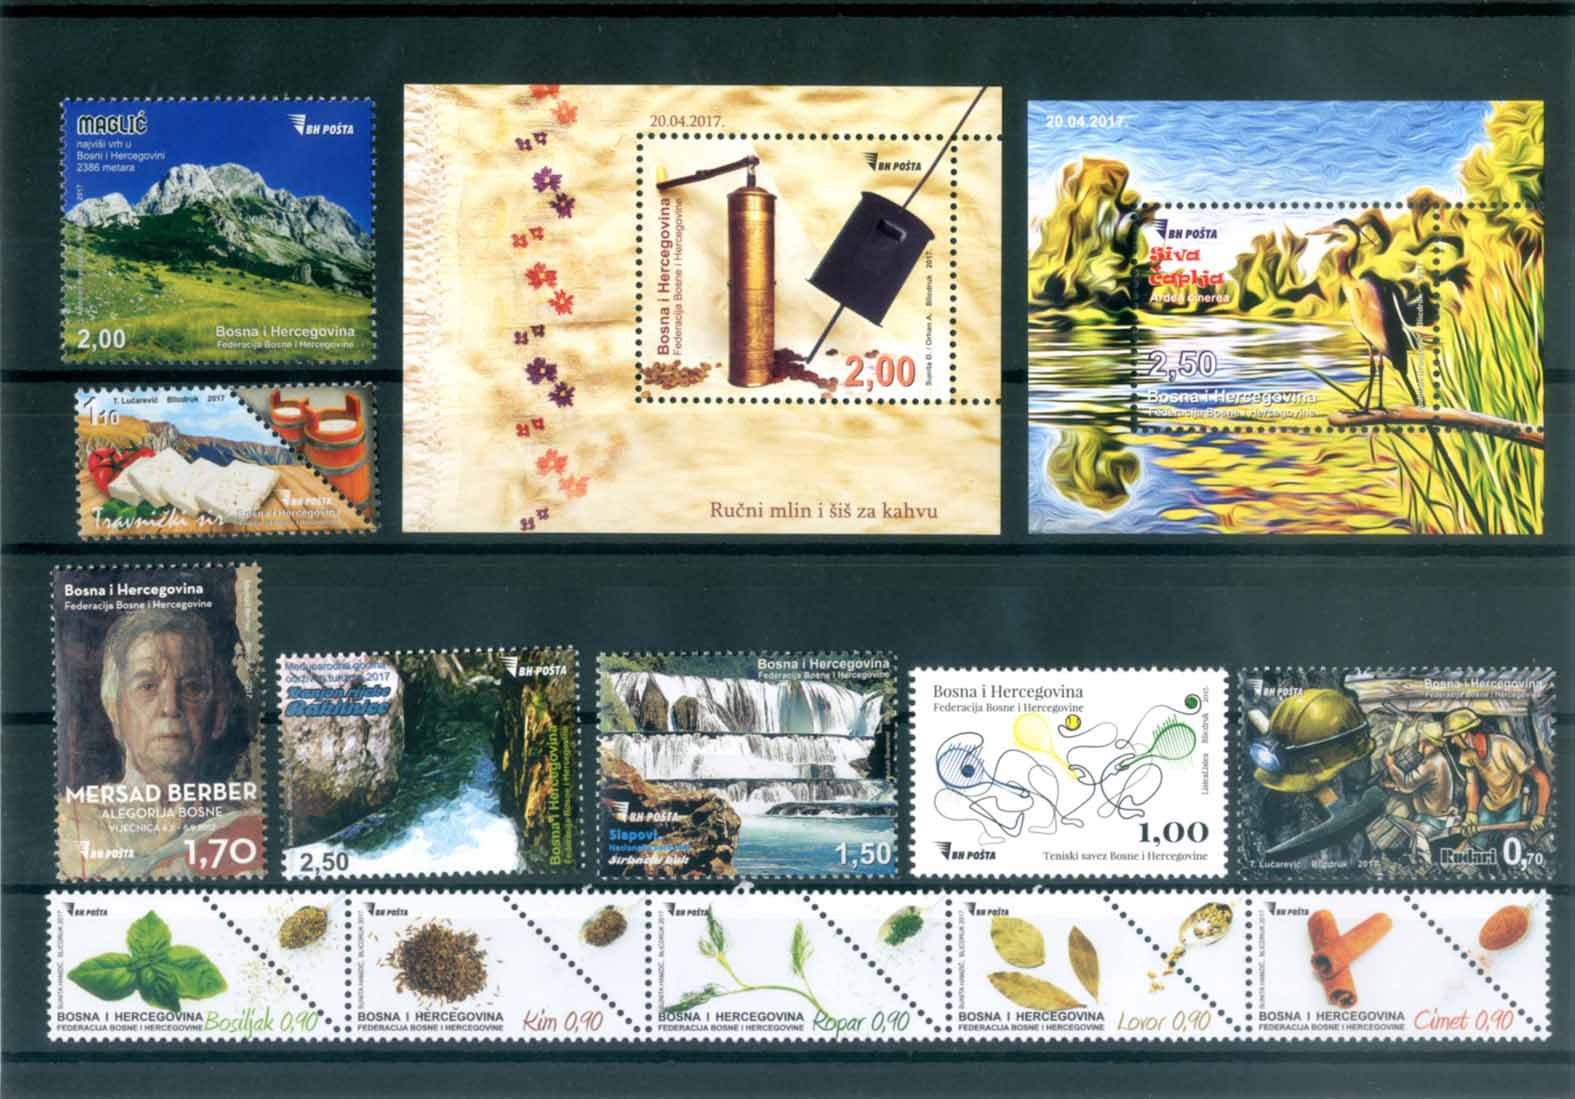 year-set-of-special-postage-stamps-2017